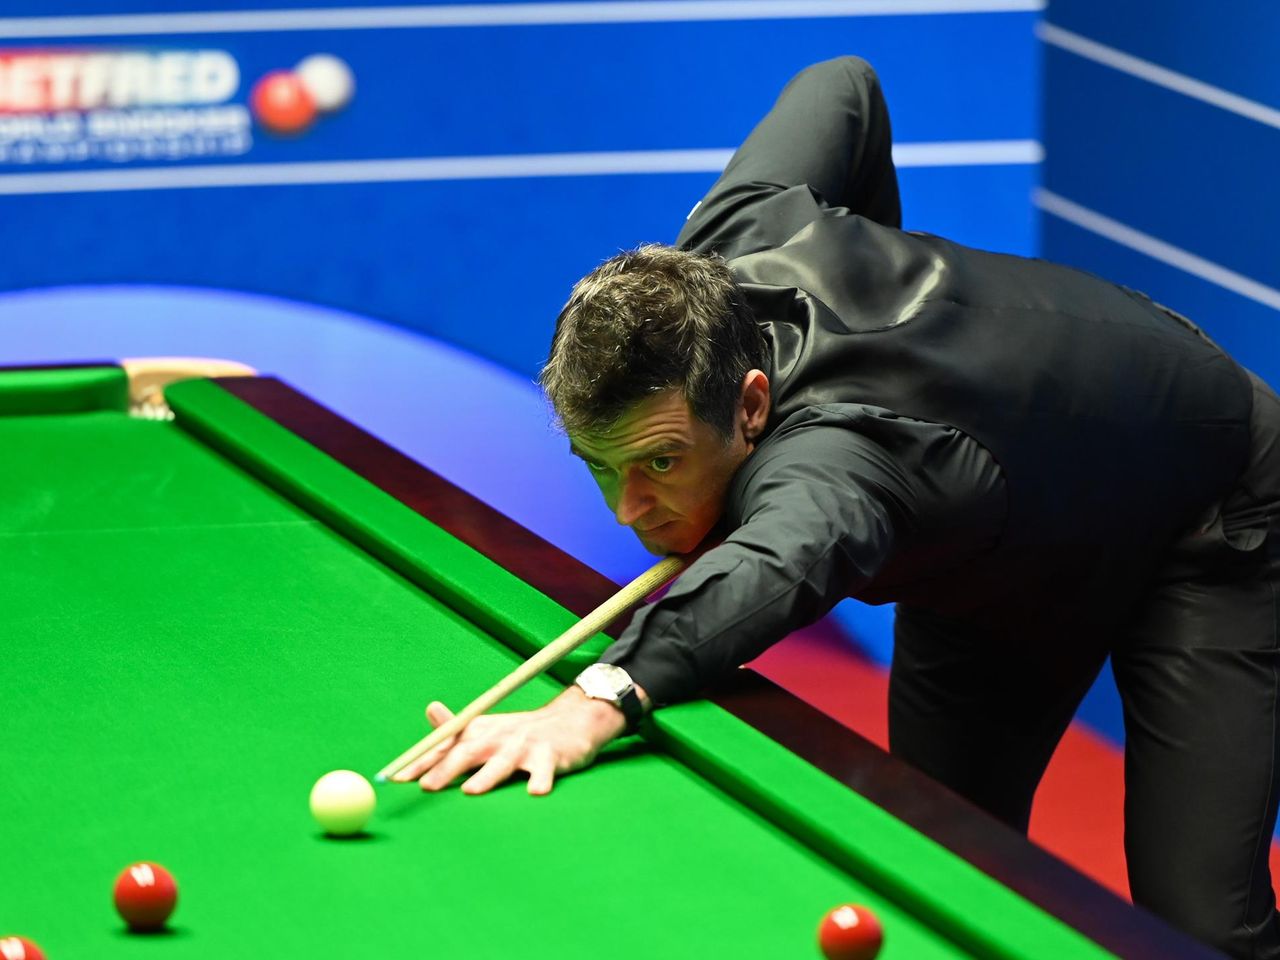 Snooker British Open 2021 Draw Results Hector Walsh Rumor